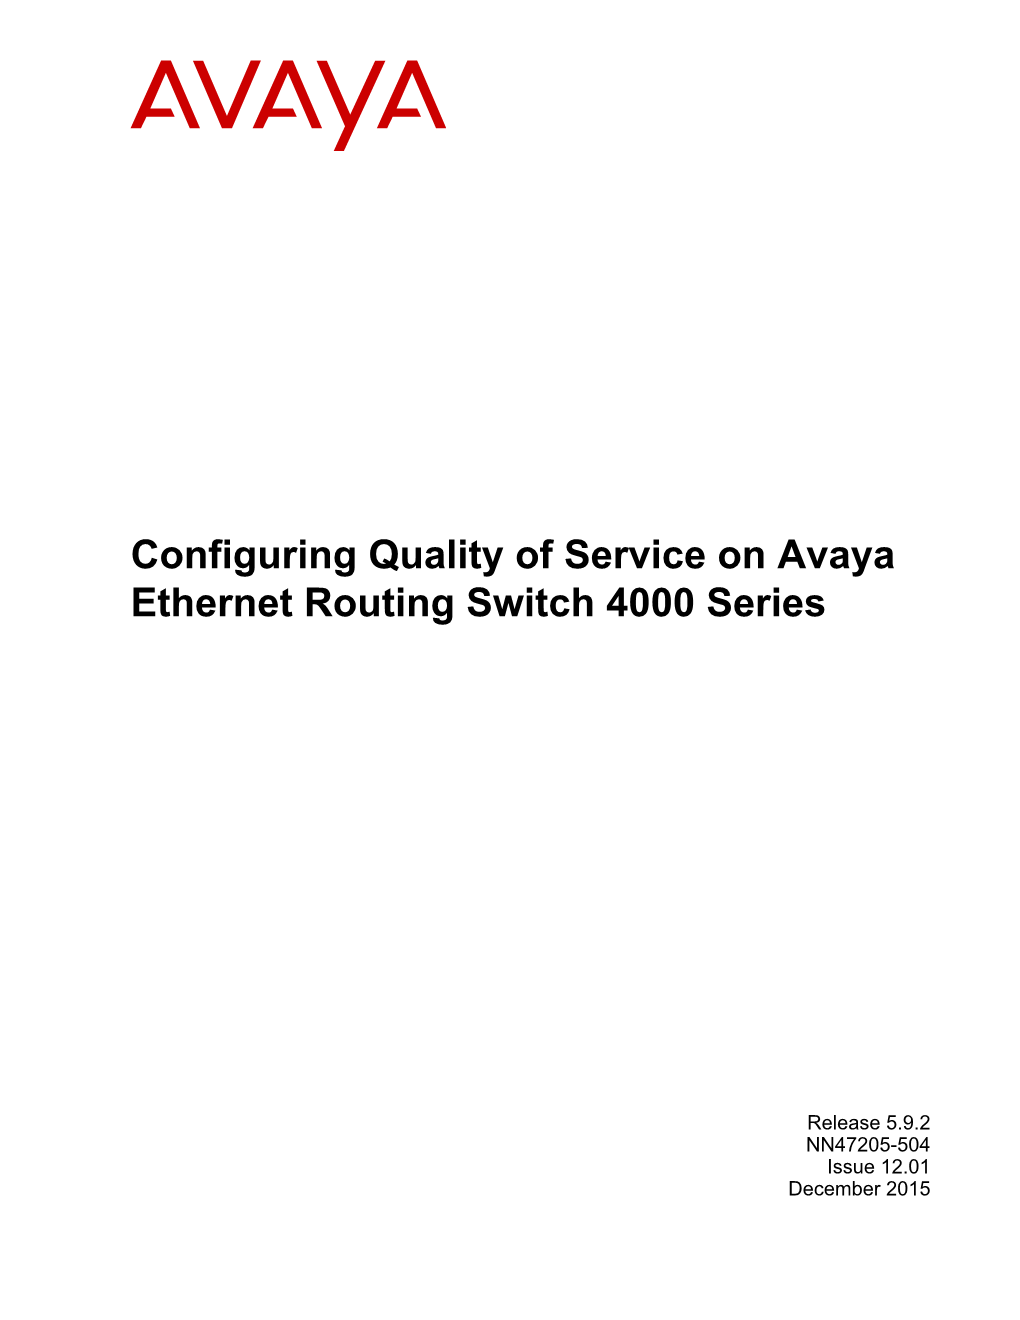 Configuring Quality of Service on Avaya Ethernet Routing Switch 4000 Series